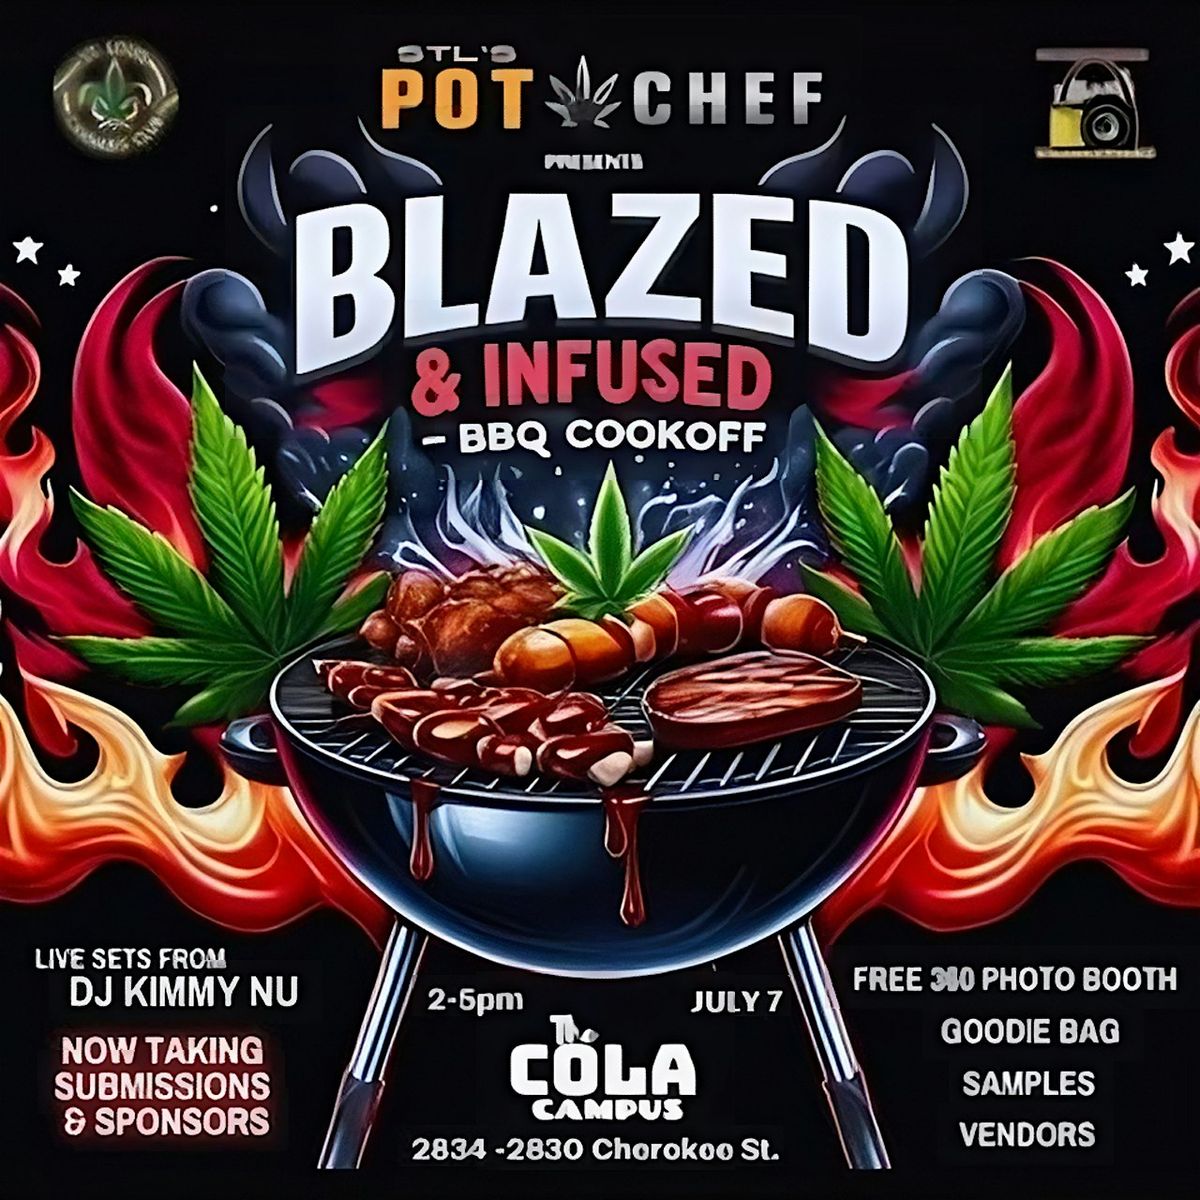 STL's Pot Chef Presents Blazed & Infused BBQ Cook- Off